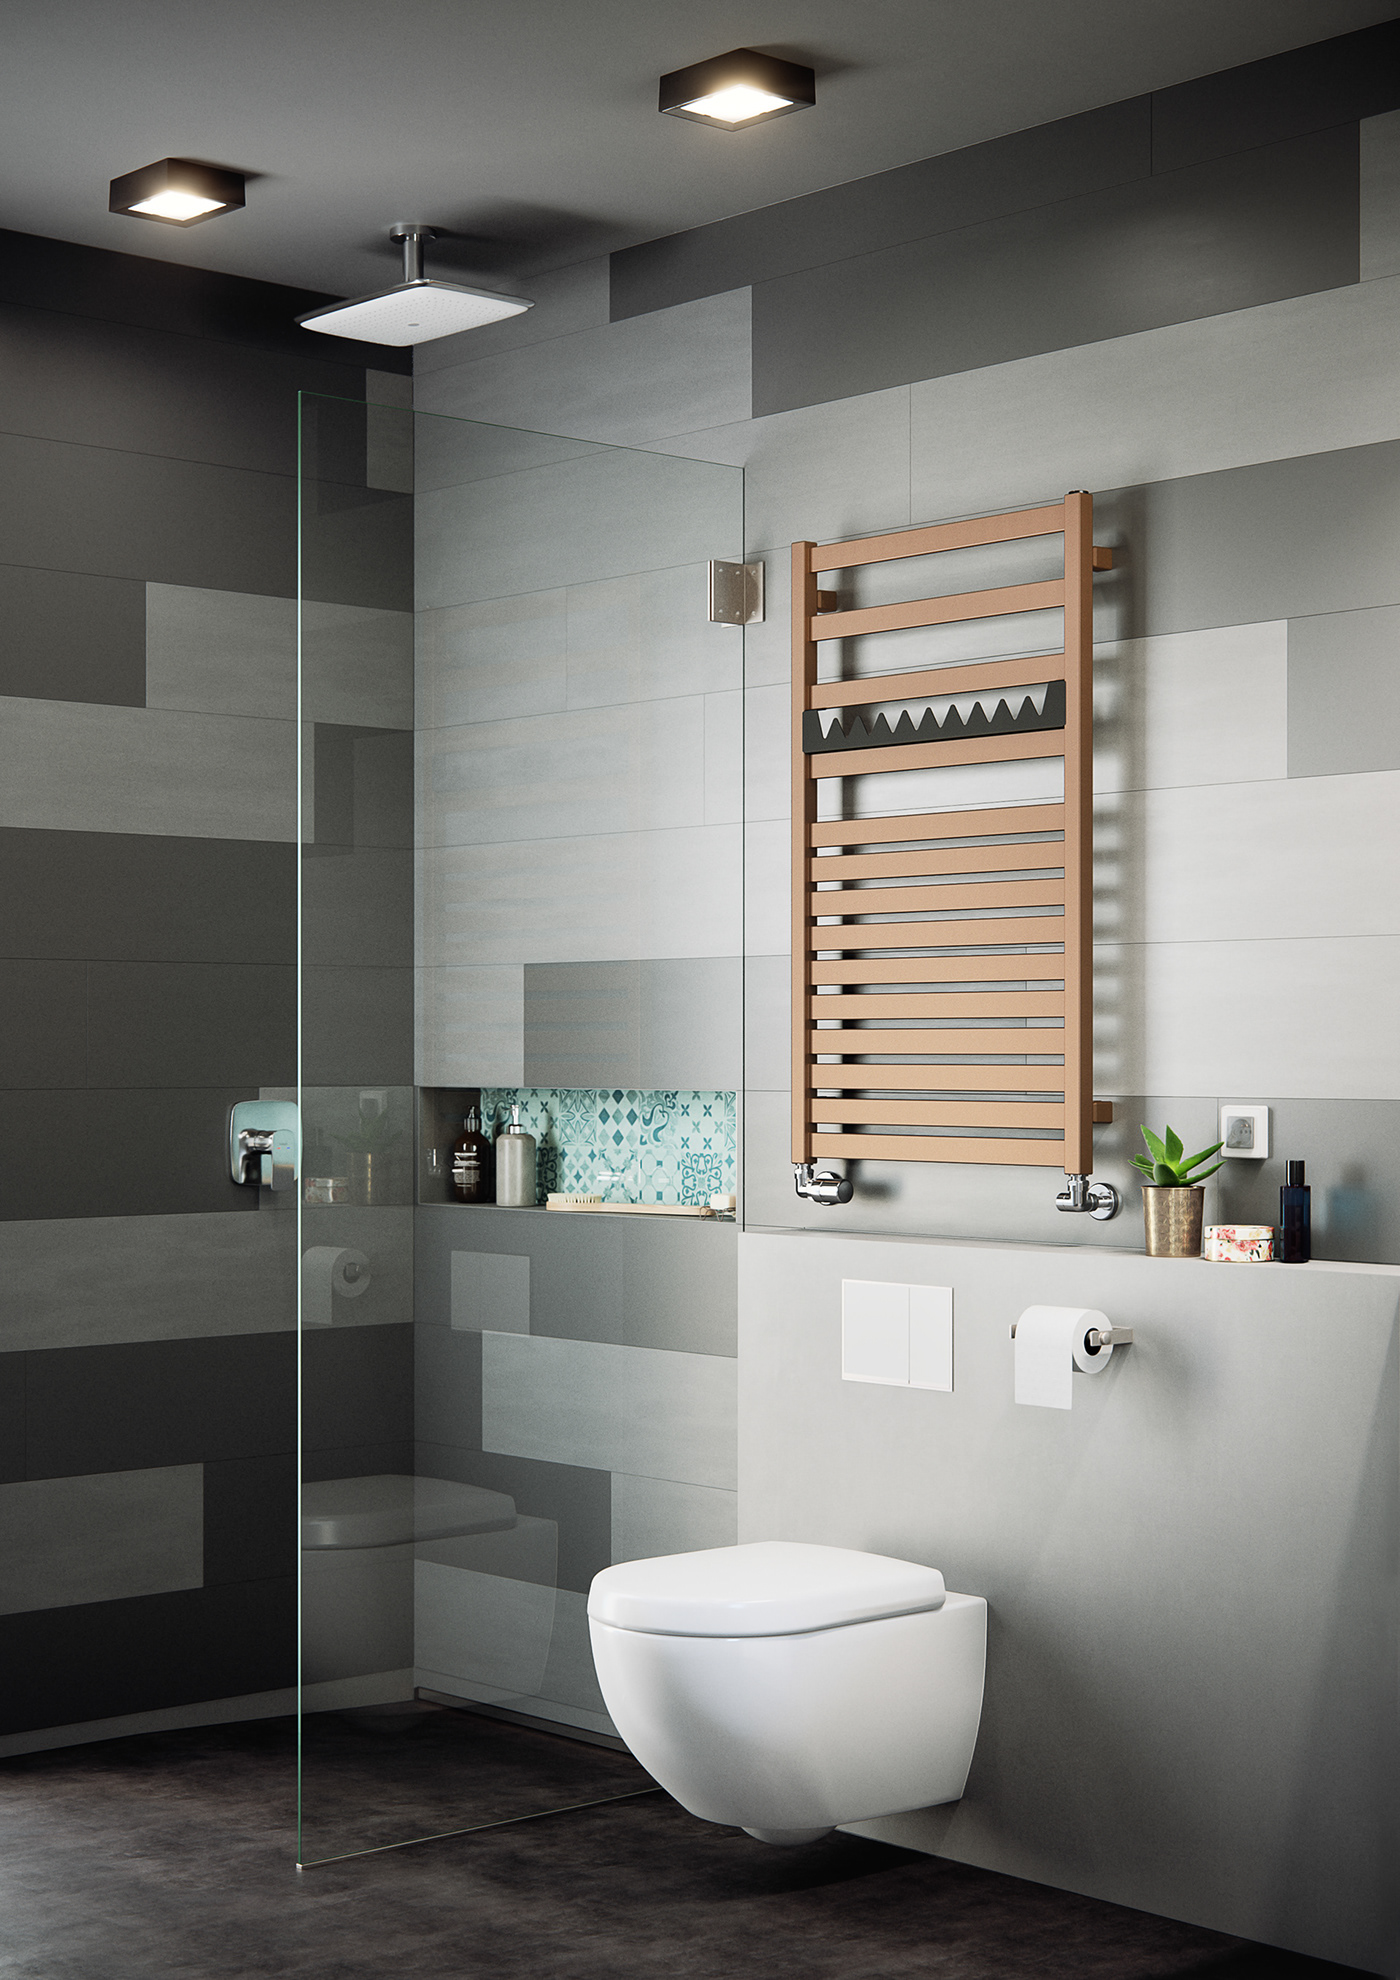 Terma Render vray 3ds max bathroom grey grohe